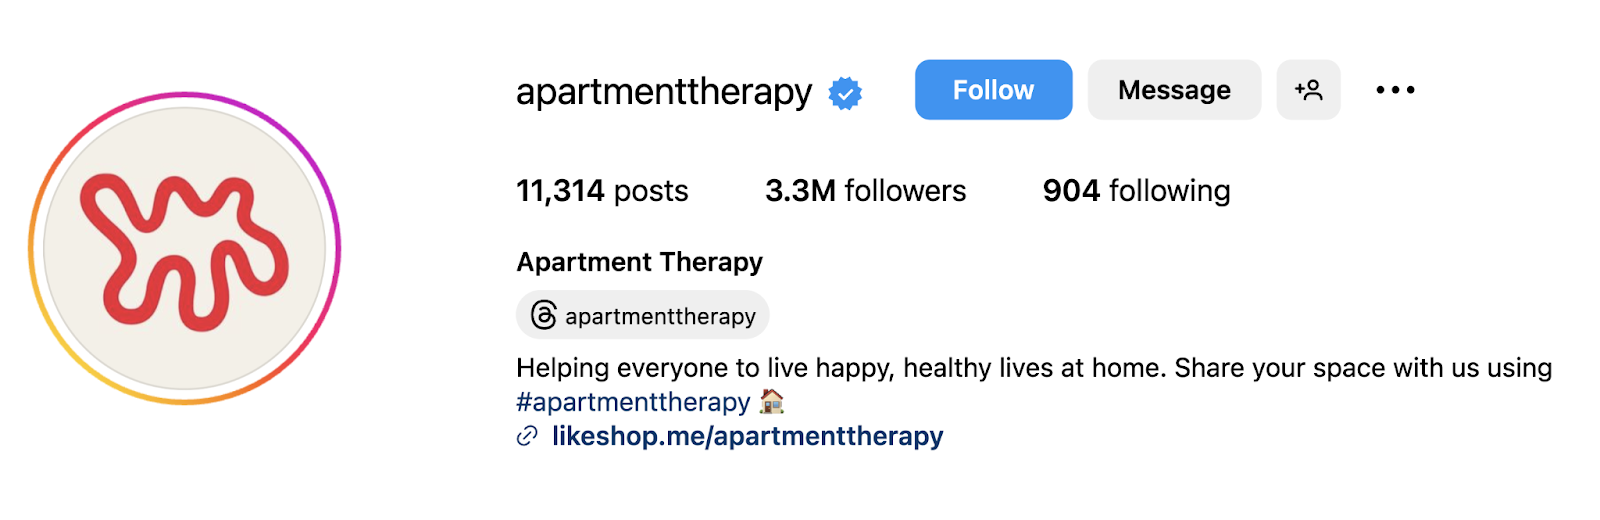 @apartmenttherapy Instagram profile, showing the number of followers